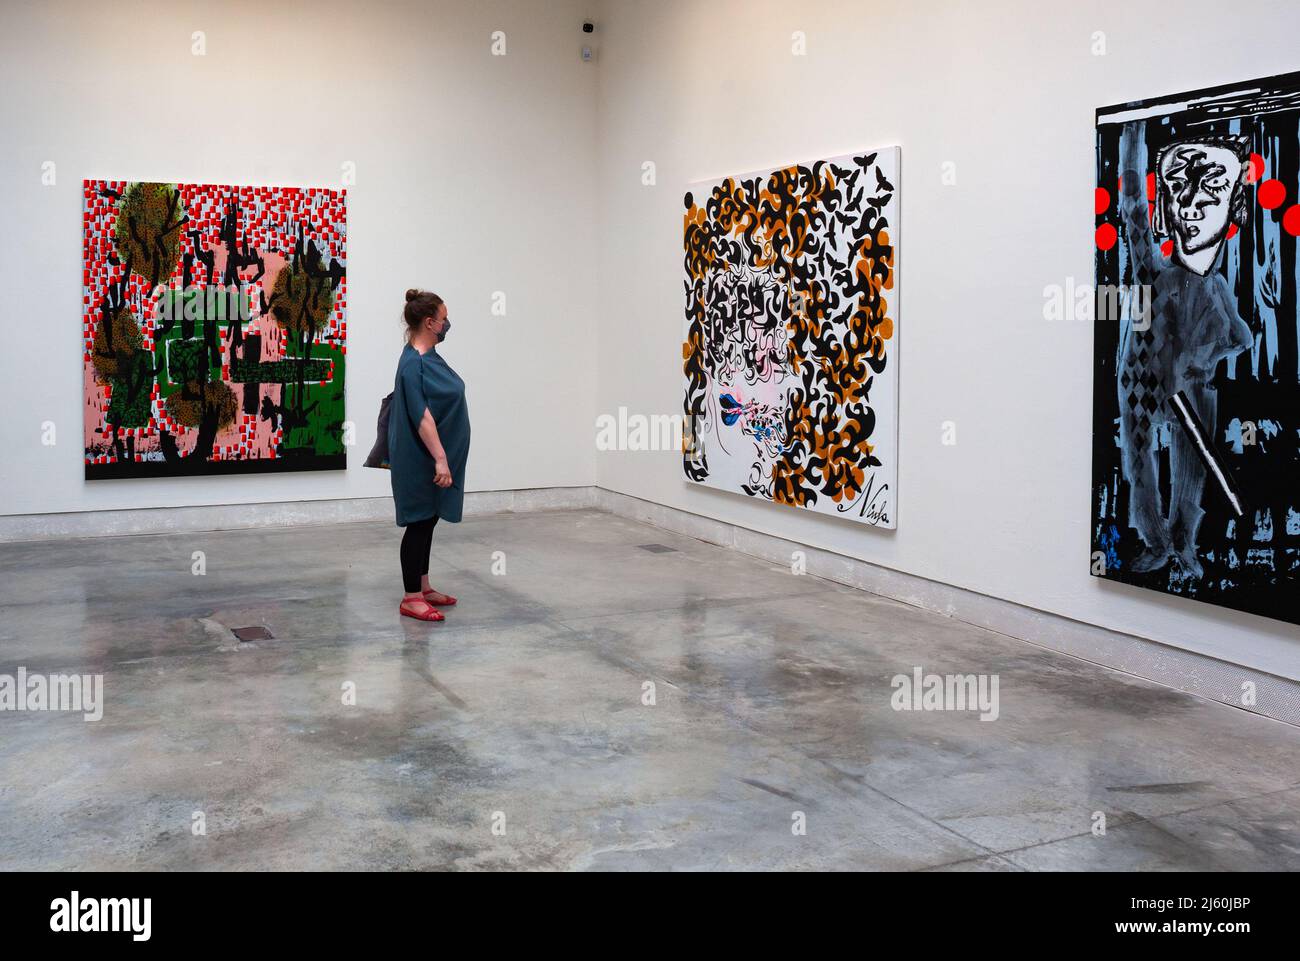 VENICE, ITALY - April 20: Painting of Charline von Heyl at the 59th International Art exhibition of Venice biennale on April 20, 2022 Stock Photo